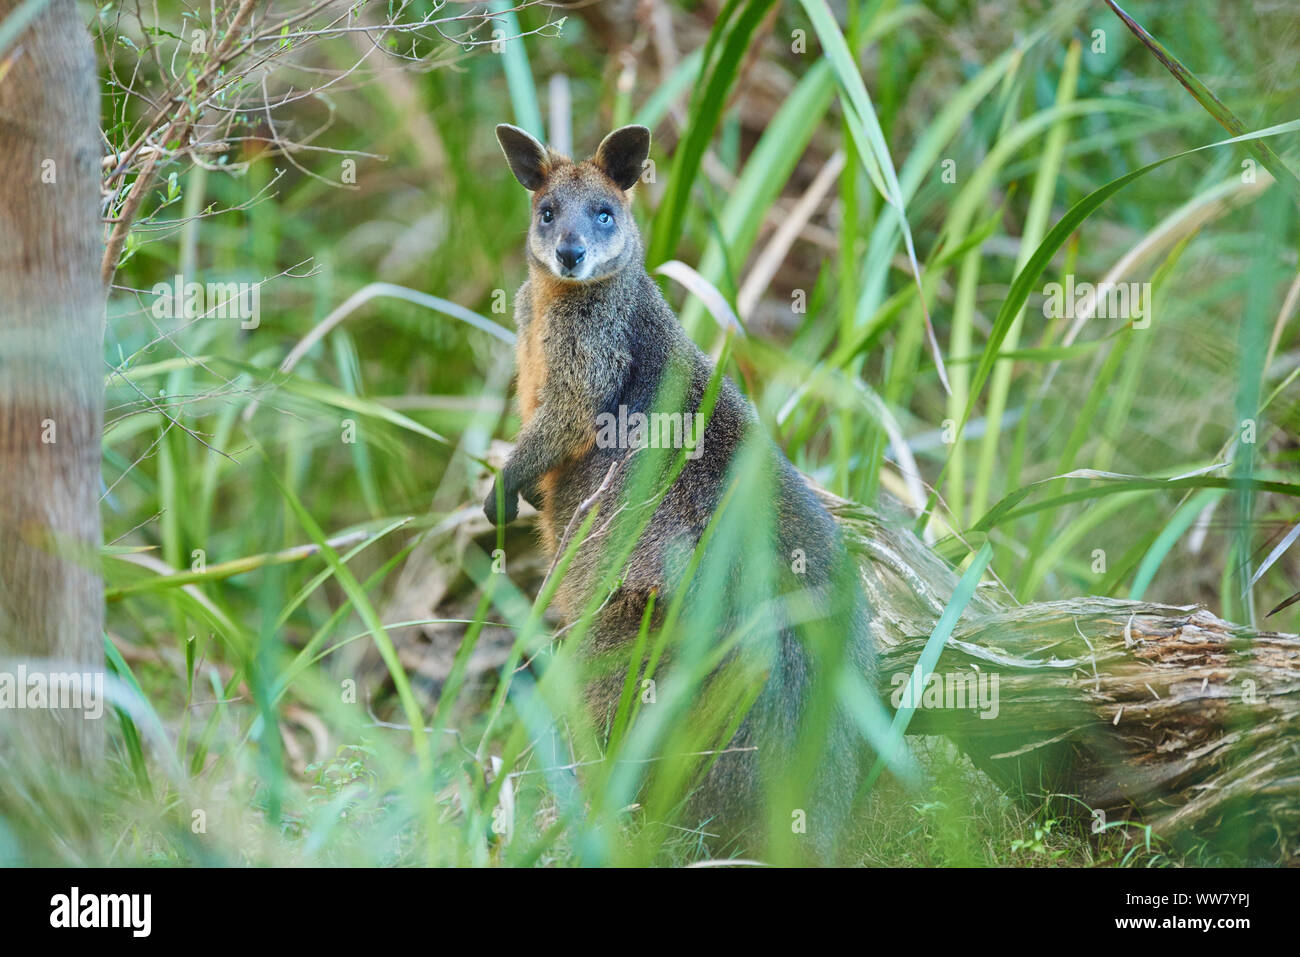 Swamp wallaby (Wallabia bicolor) standing in the bushes, looking at camera, wildlife, Phillip Island, Victoria, Australia Stock Photo